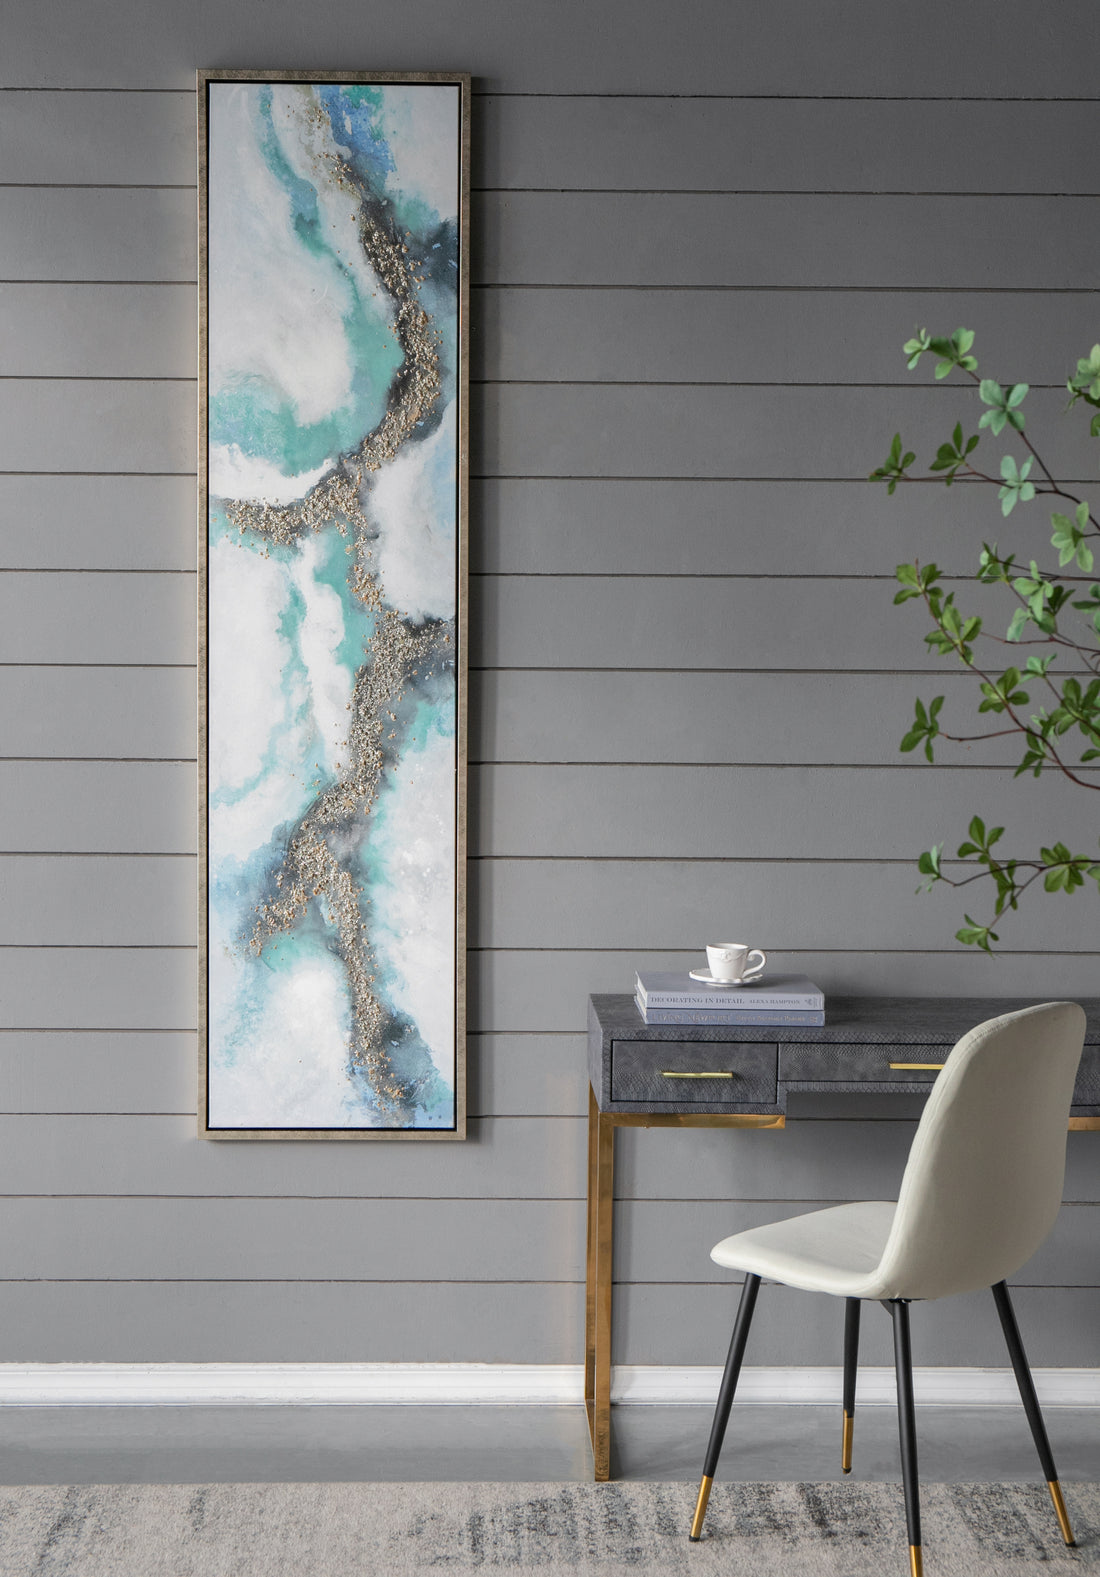 Set of 2 Elongated Modern Abstract Oil Painting